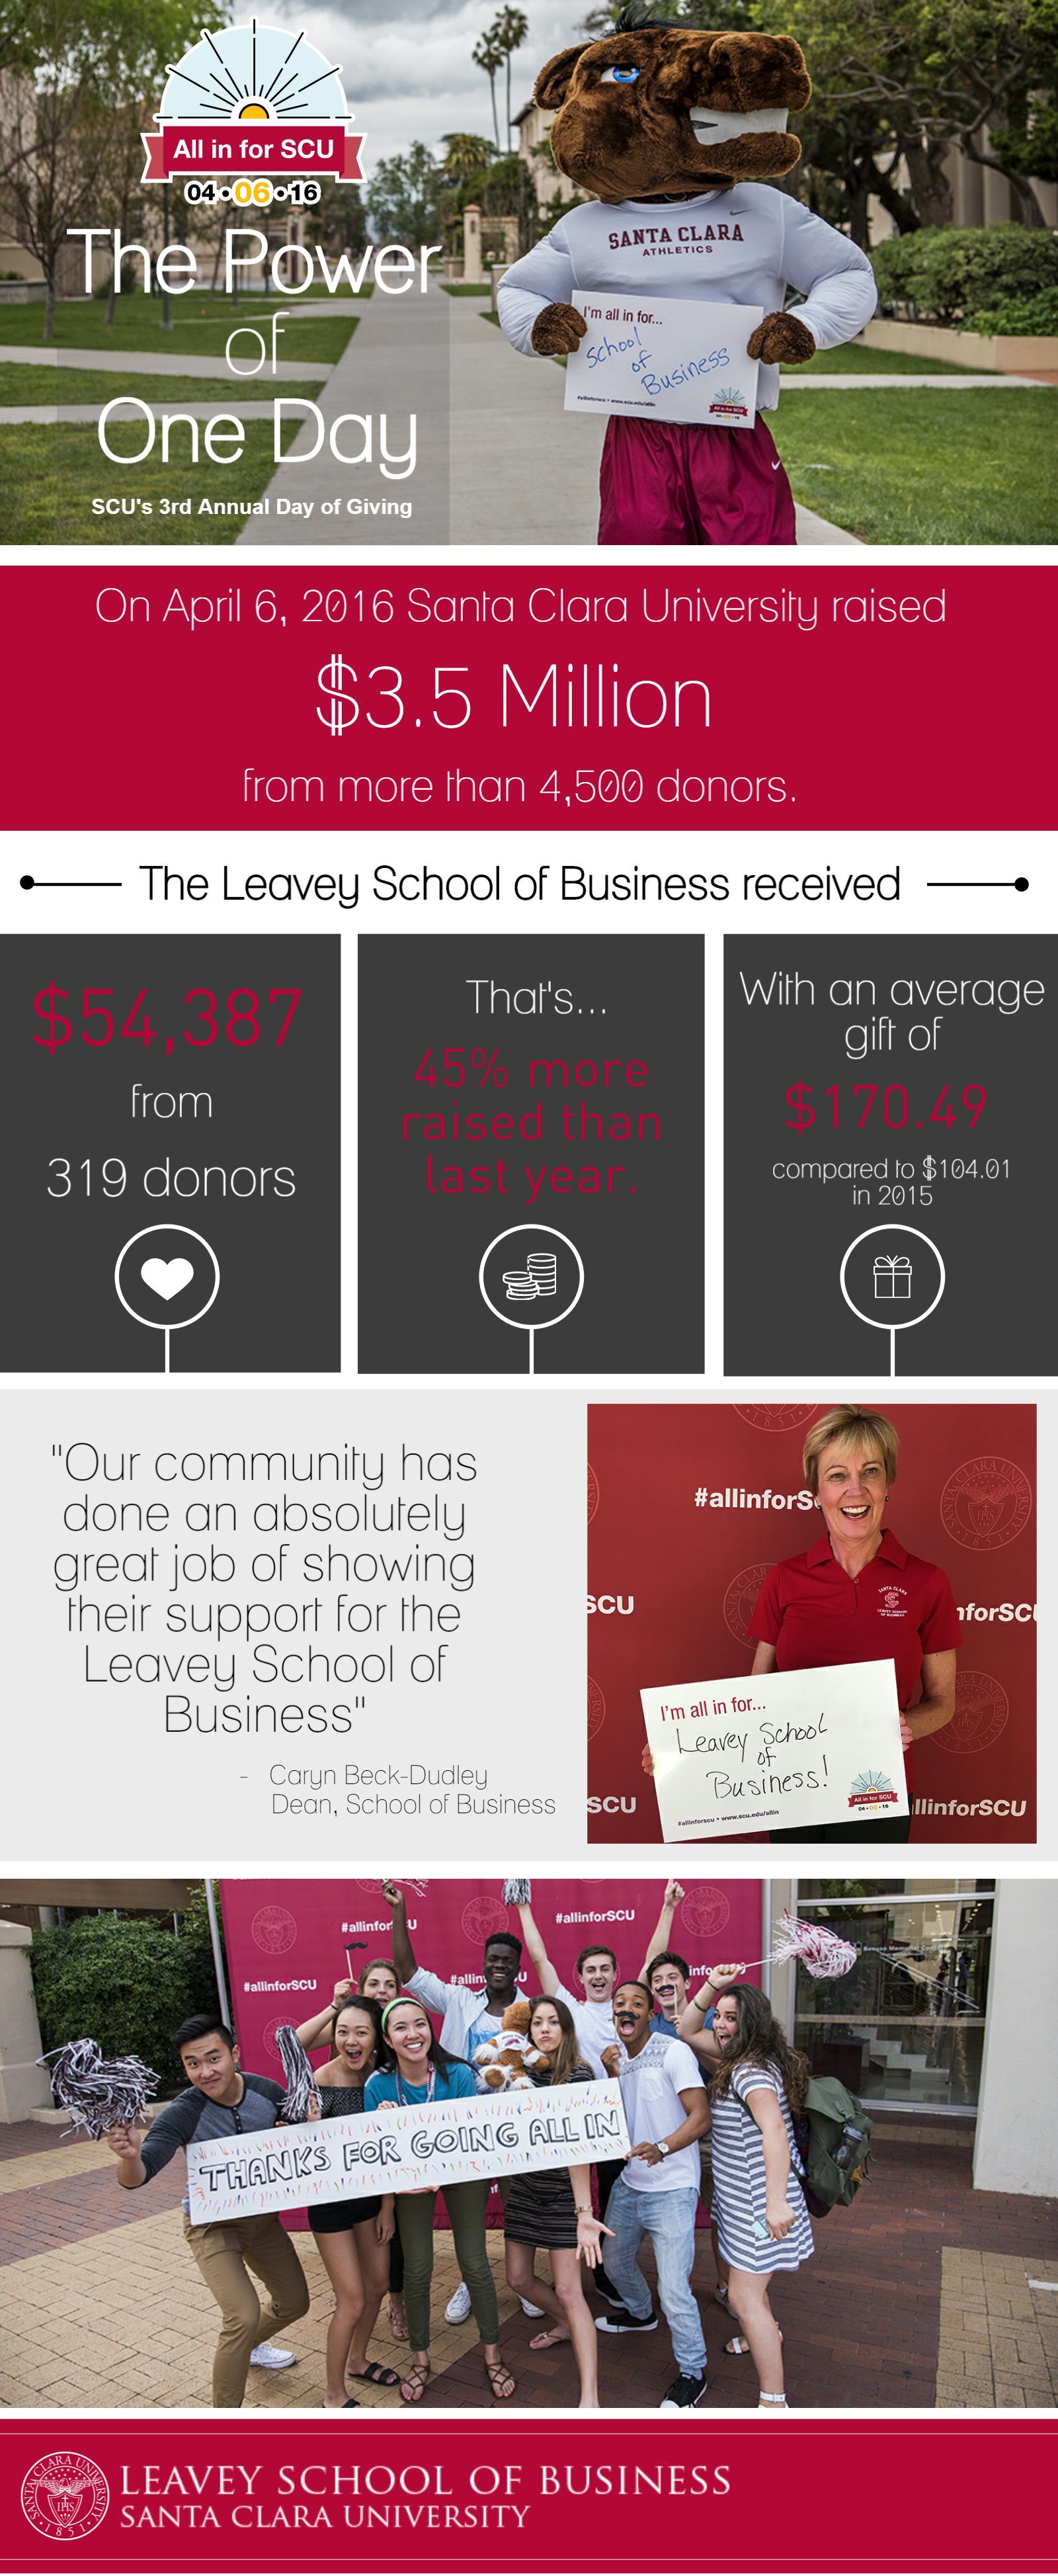 Business school results for SCU's 3rd annual Day of Giving